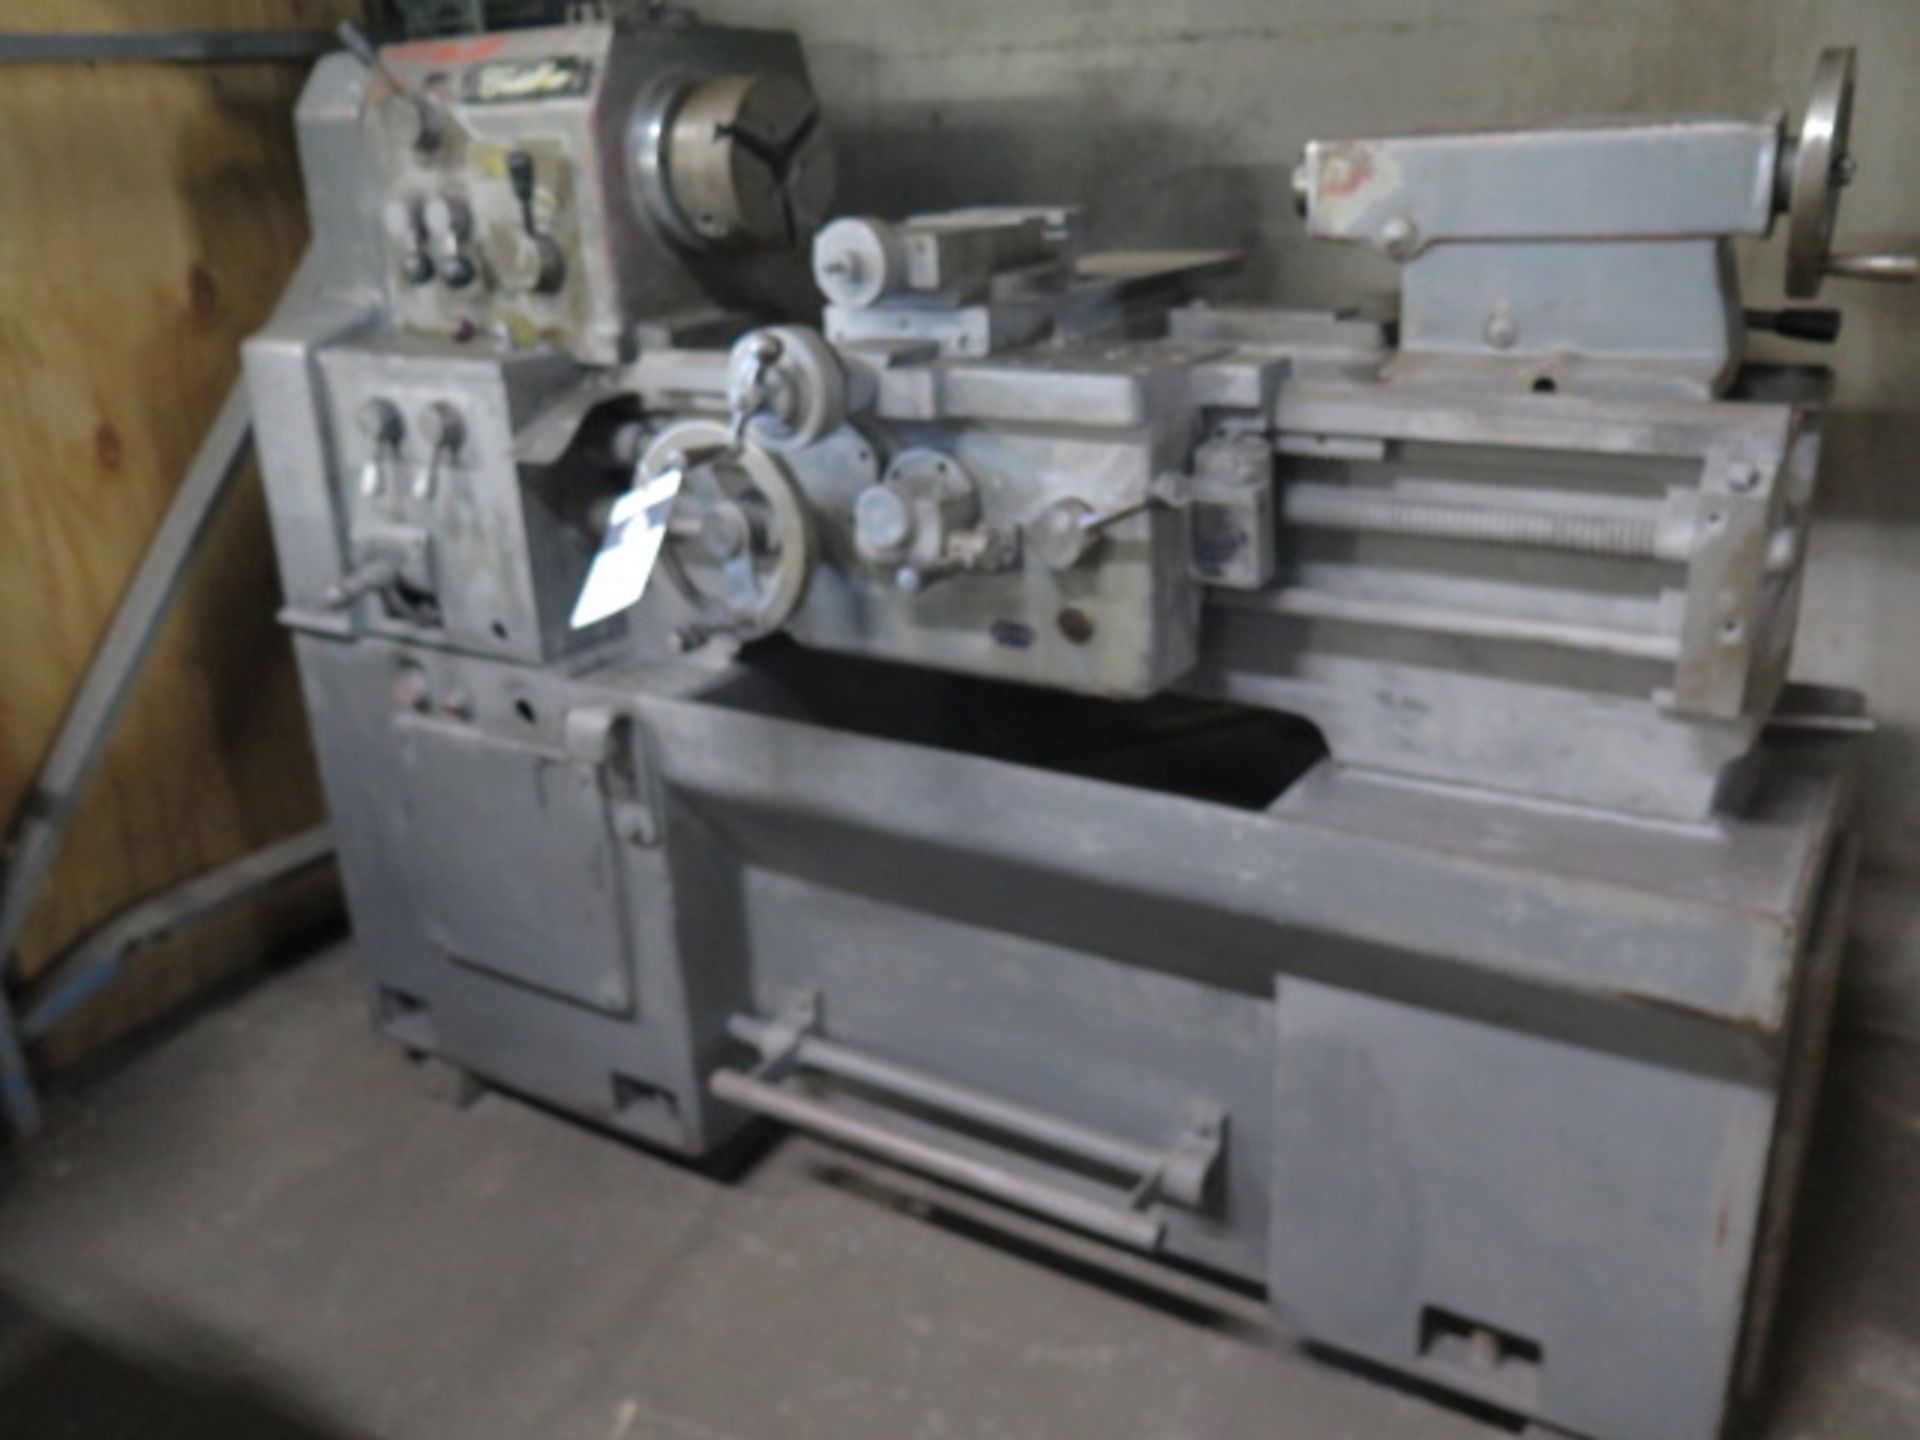 Cadillac 13” x 24” Geared Head Gap Bed Lathe w/ 83-1800 RPM, Inch Threading, Tailstock, SOLD AS IS - Image 2 of 9